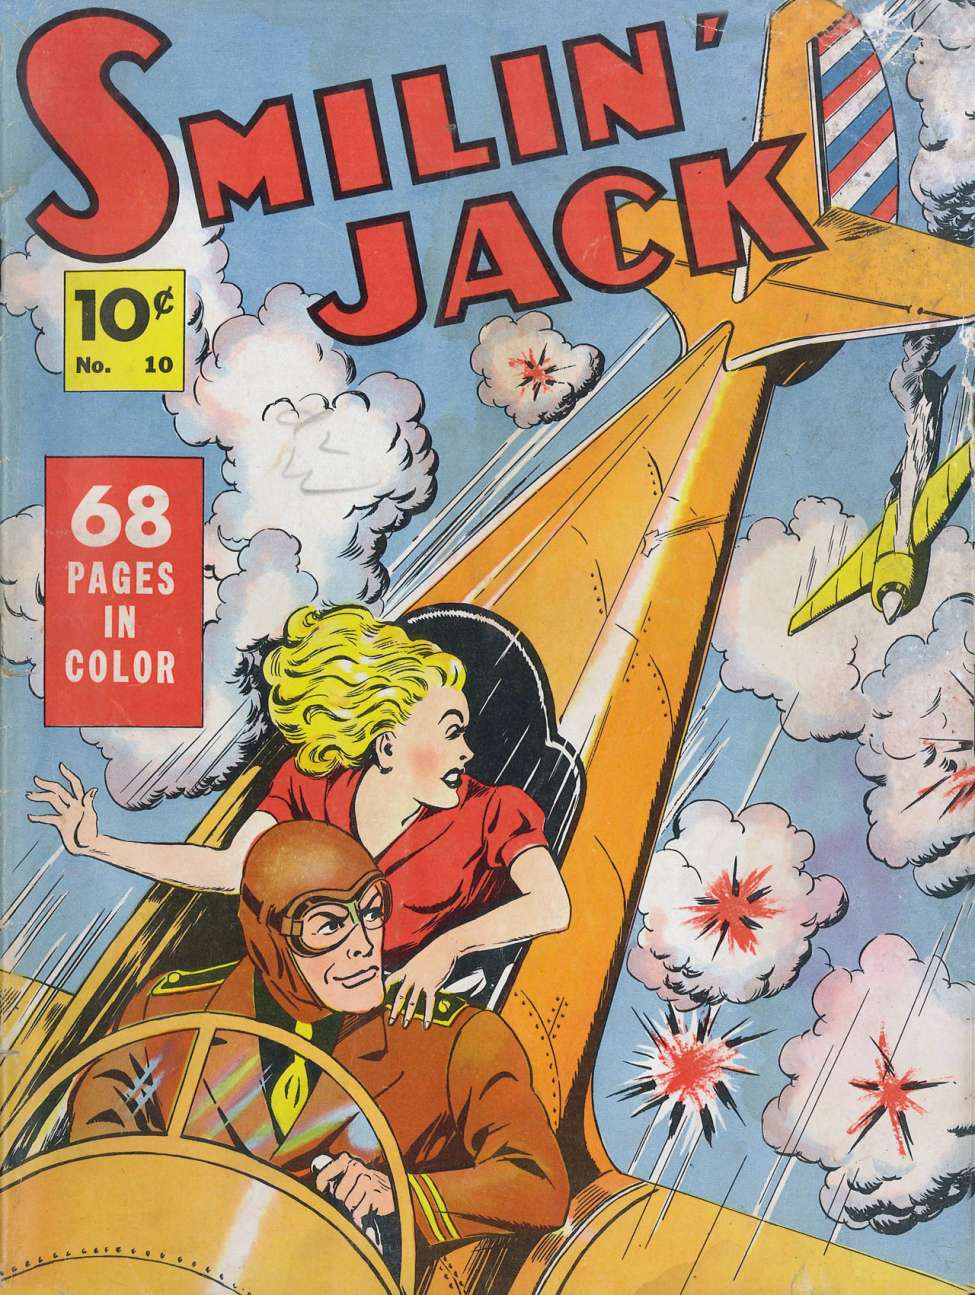 Book Cover For 10 - Smilin' Jack